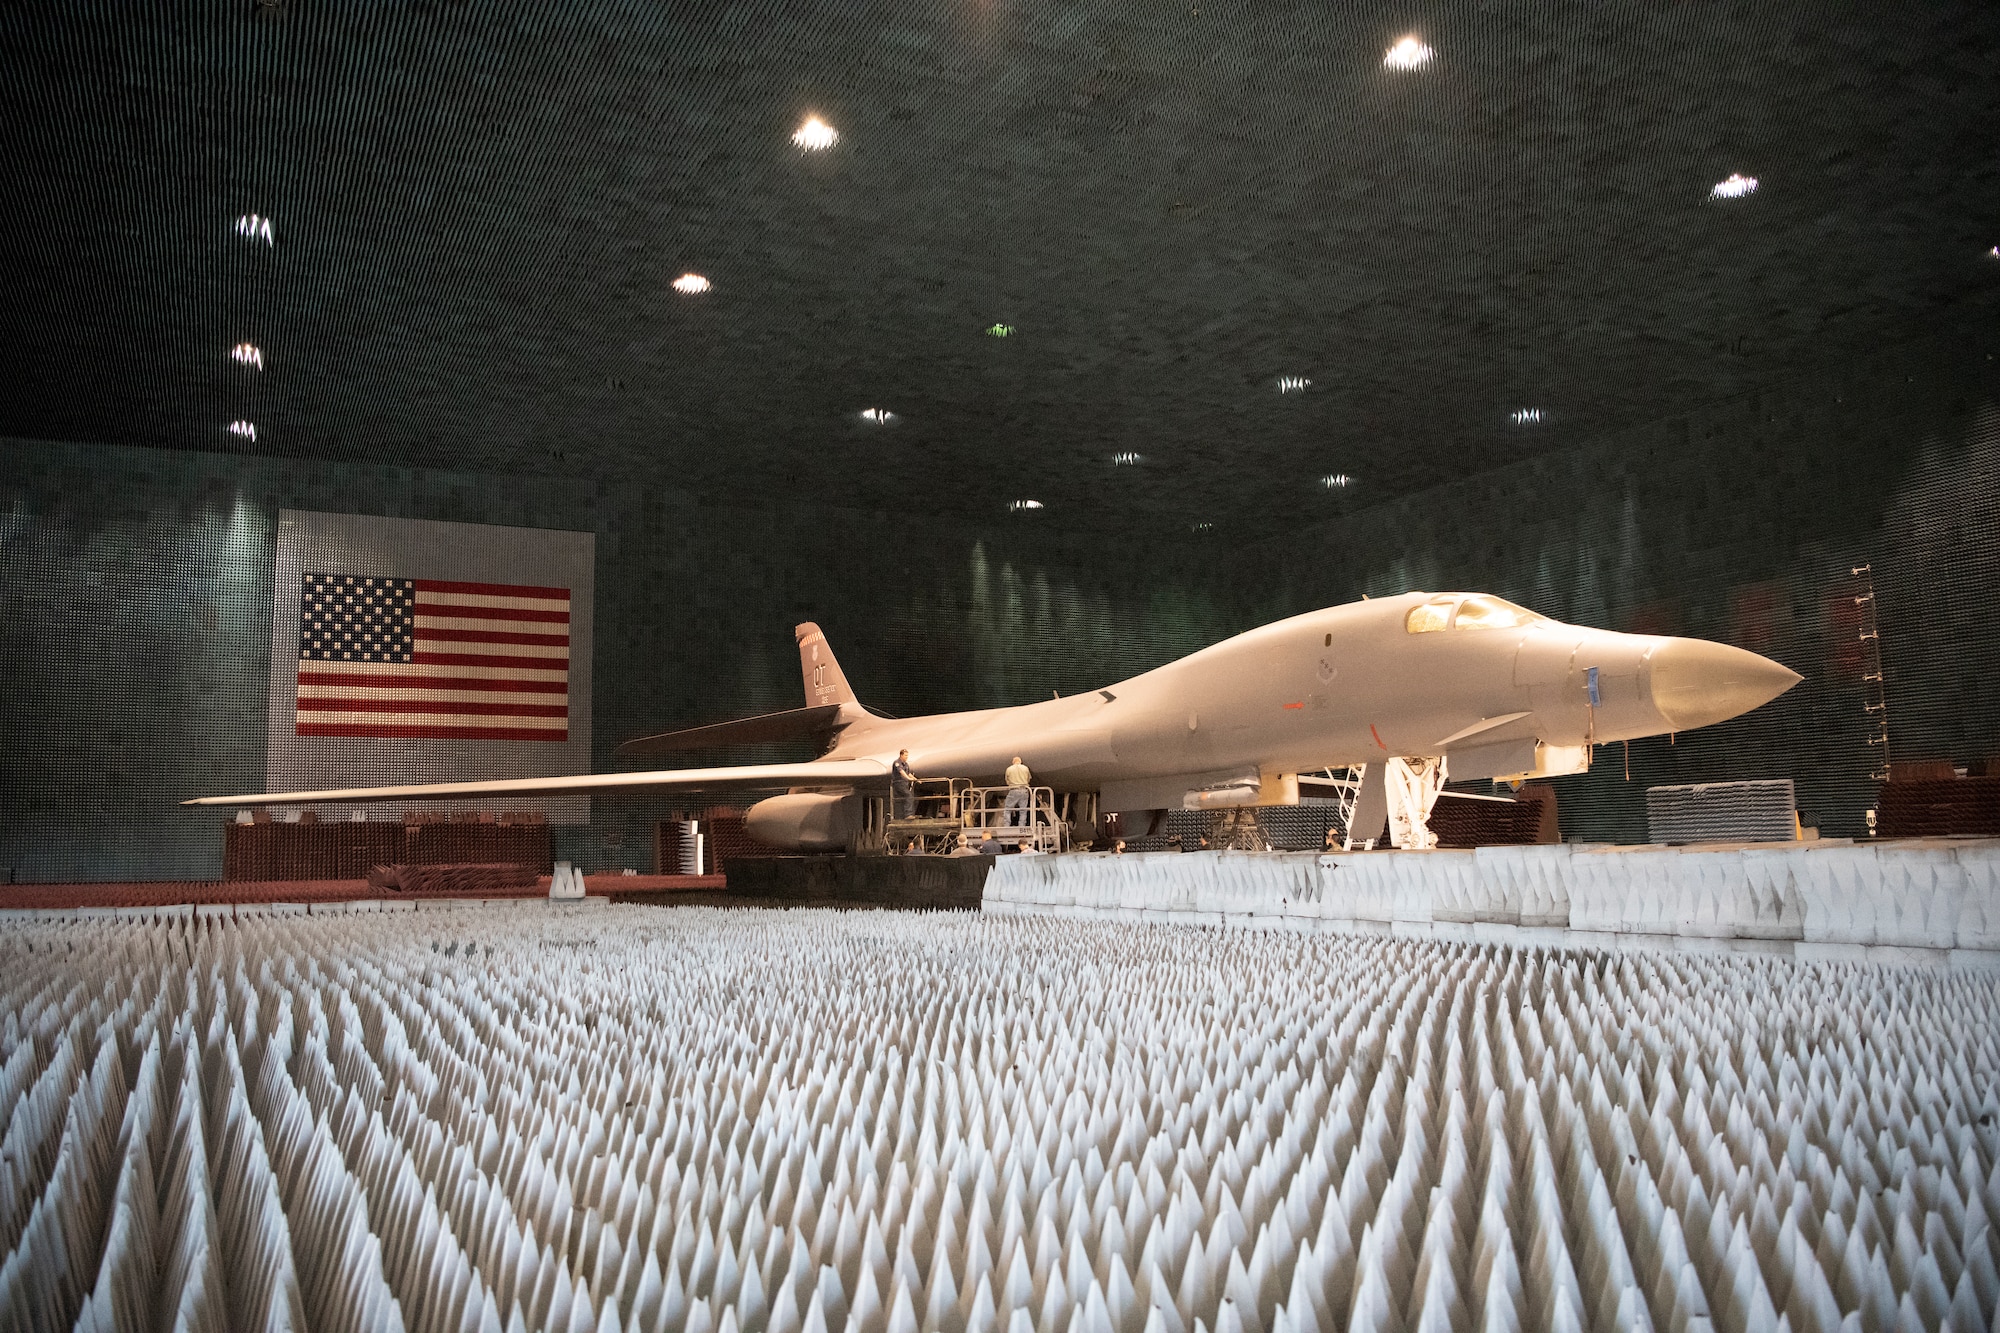 Ground crews move a B-1B Lancer into position at the Benefield Anechoic Facility on Edwards Air Force Base, California, May 20. The Lancer, from the 337th Test and Evaluation Squadron, 53rd Wing, out of Dyess Air Force Base, Texas, will be used to conduct testing of PFS 6.42. (Air Force photo by 1st Lt. Christine Saunders)